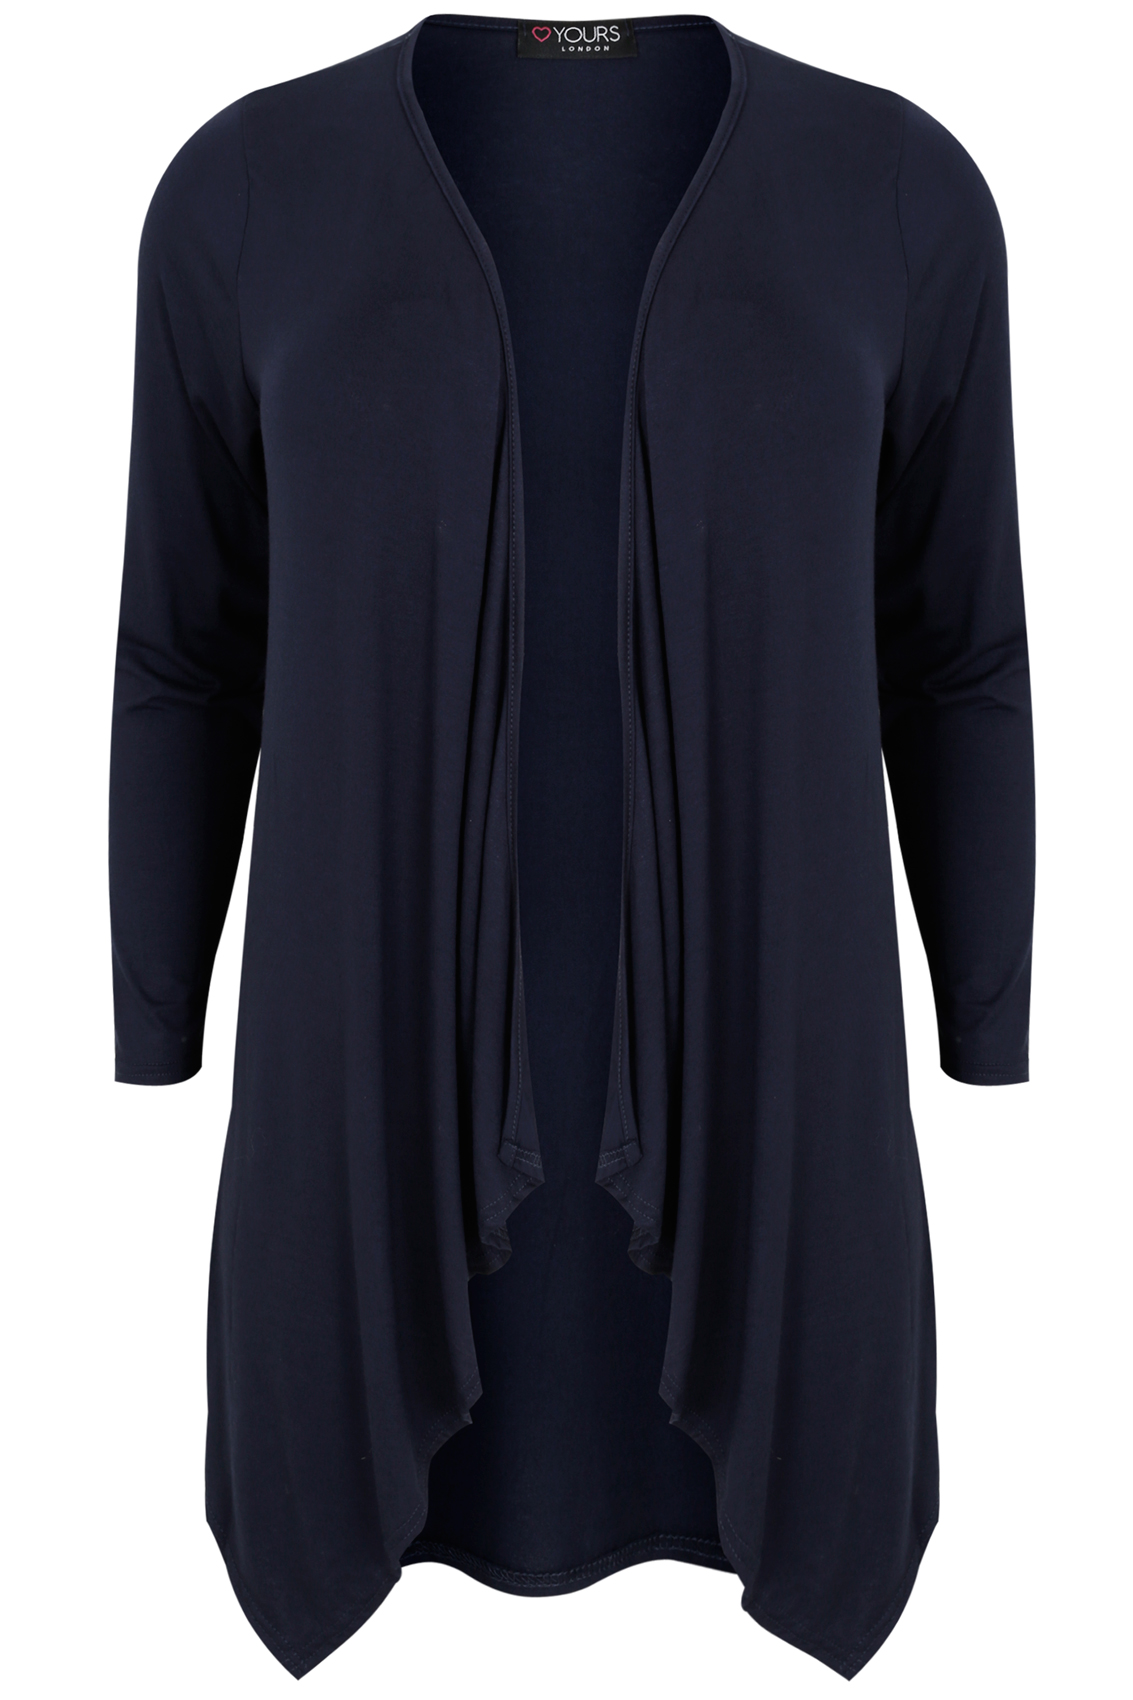 Navy Cardigan With Waterfall Front, Plus size 16 to 32